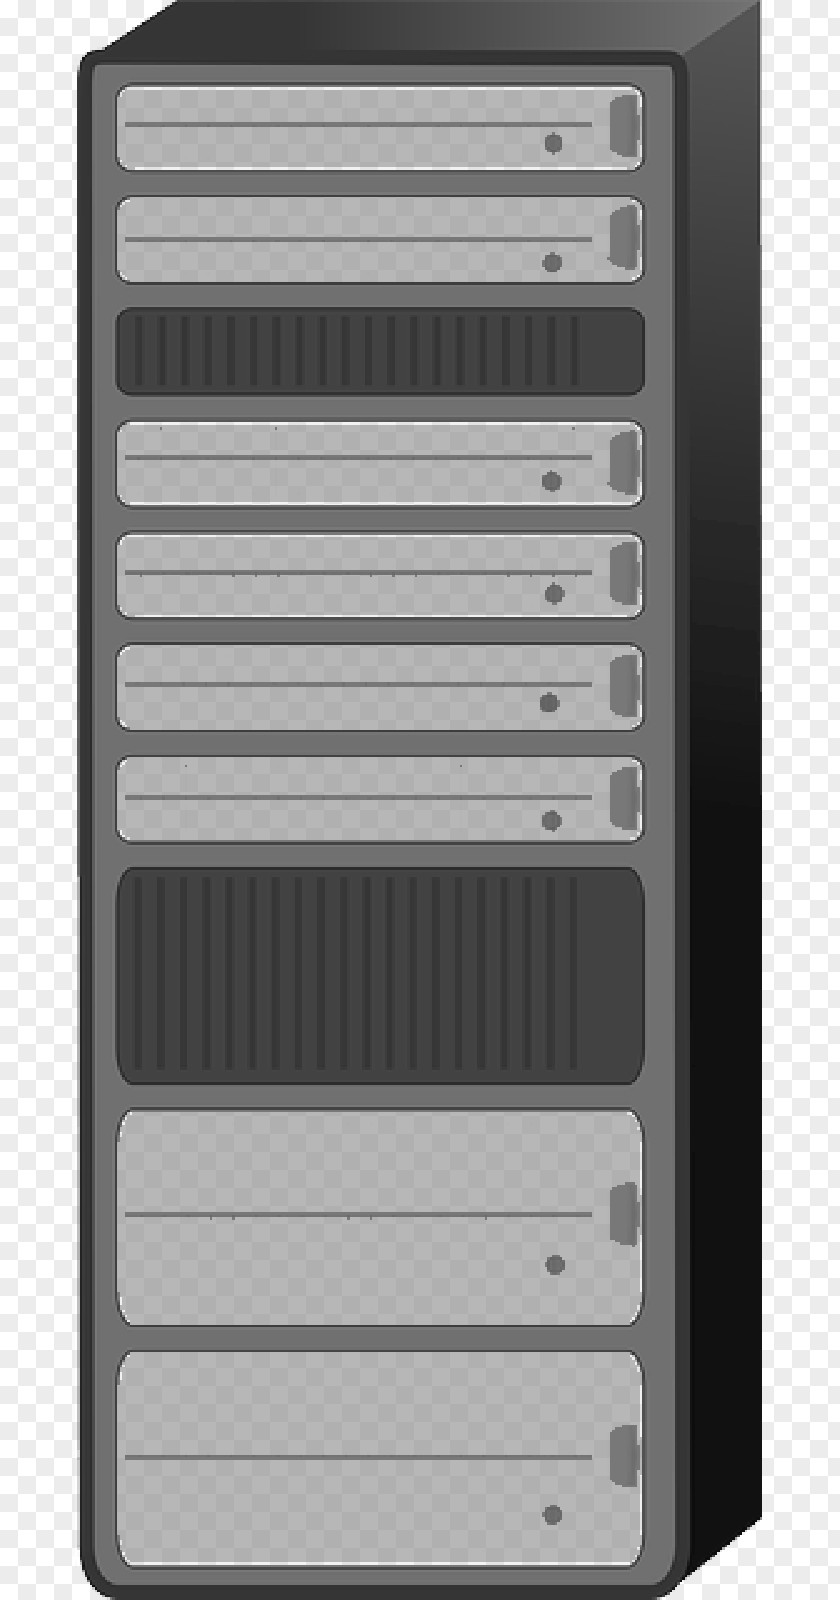 Electronic Mainframe Computer Clip Art 19-inch Rack Servers PNG